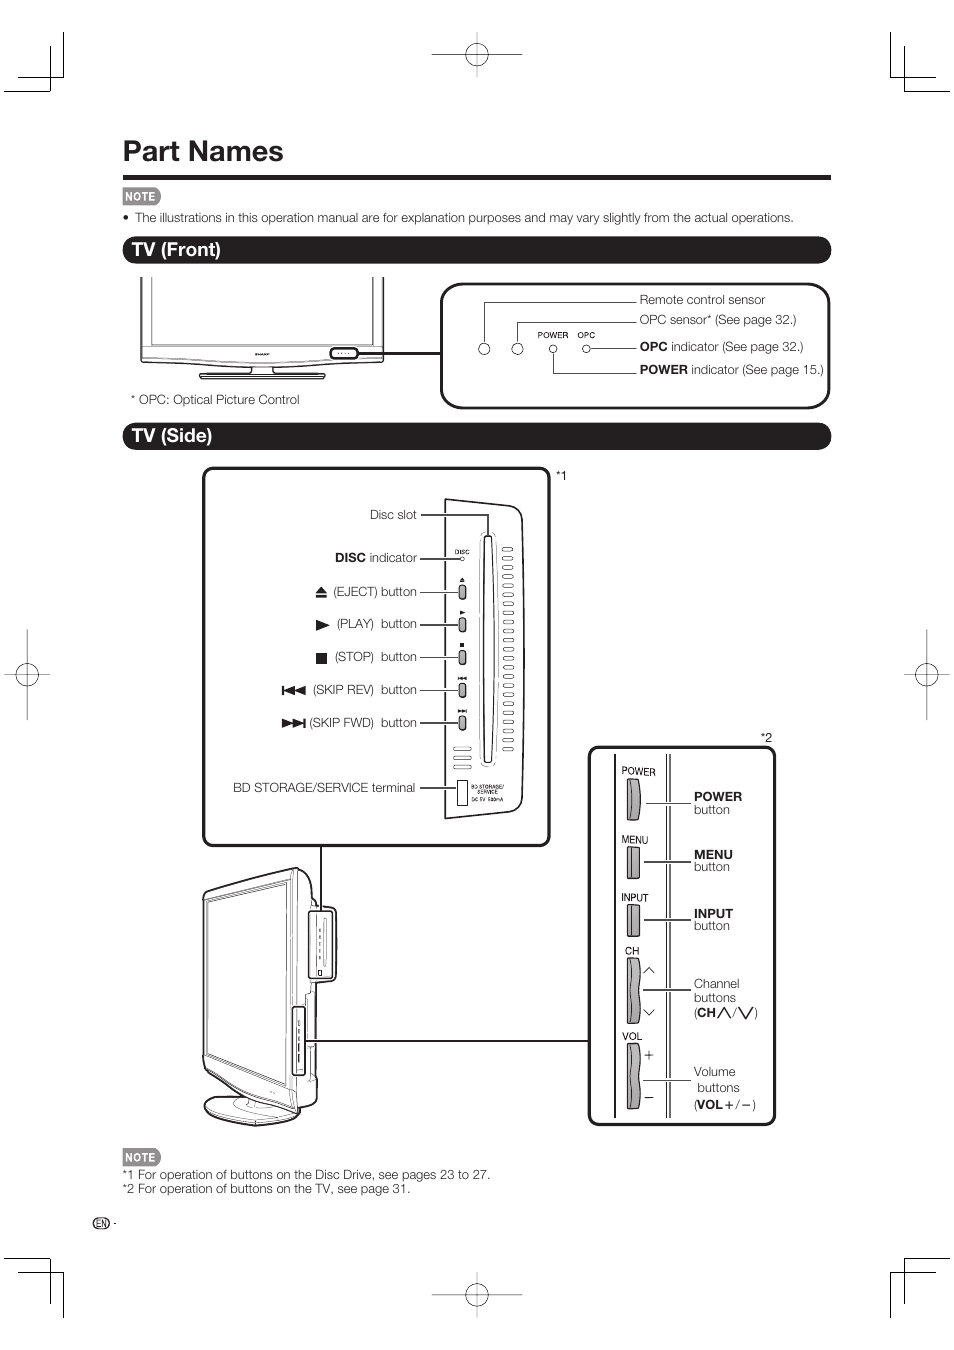 Part names, Tv (front), Tv (side) | Sharp Aquos LC 46BD80UN User Manual | Page 12 / 65